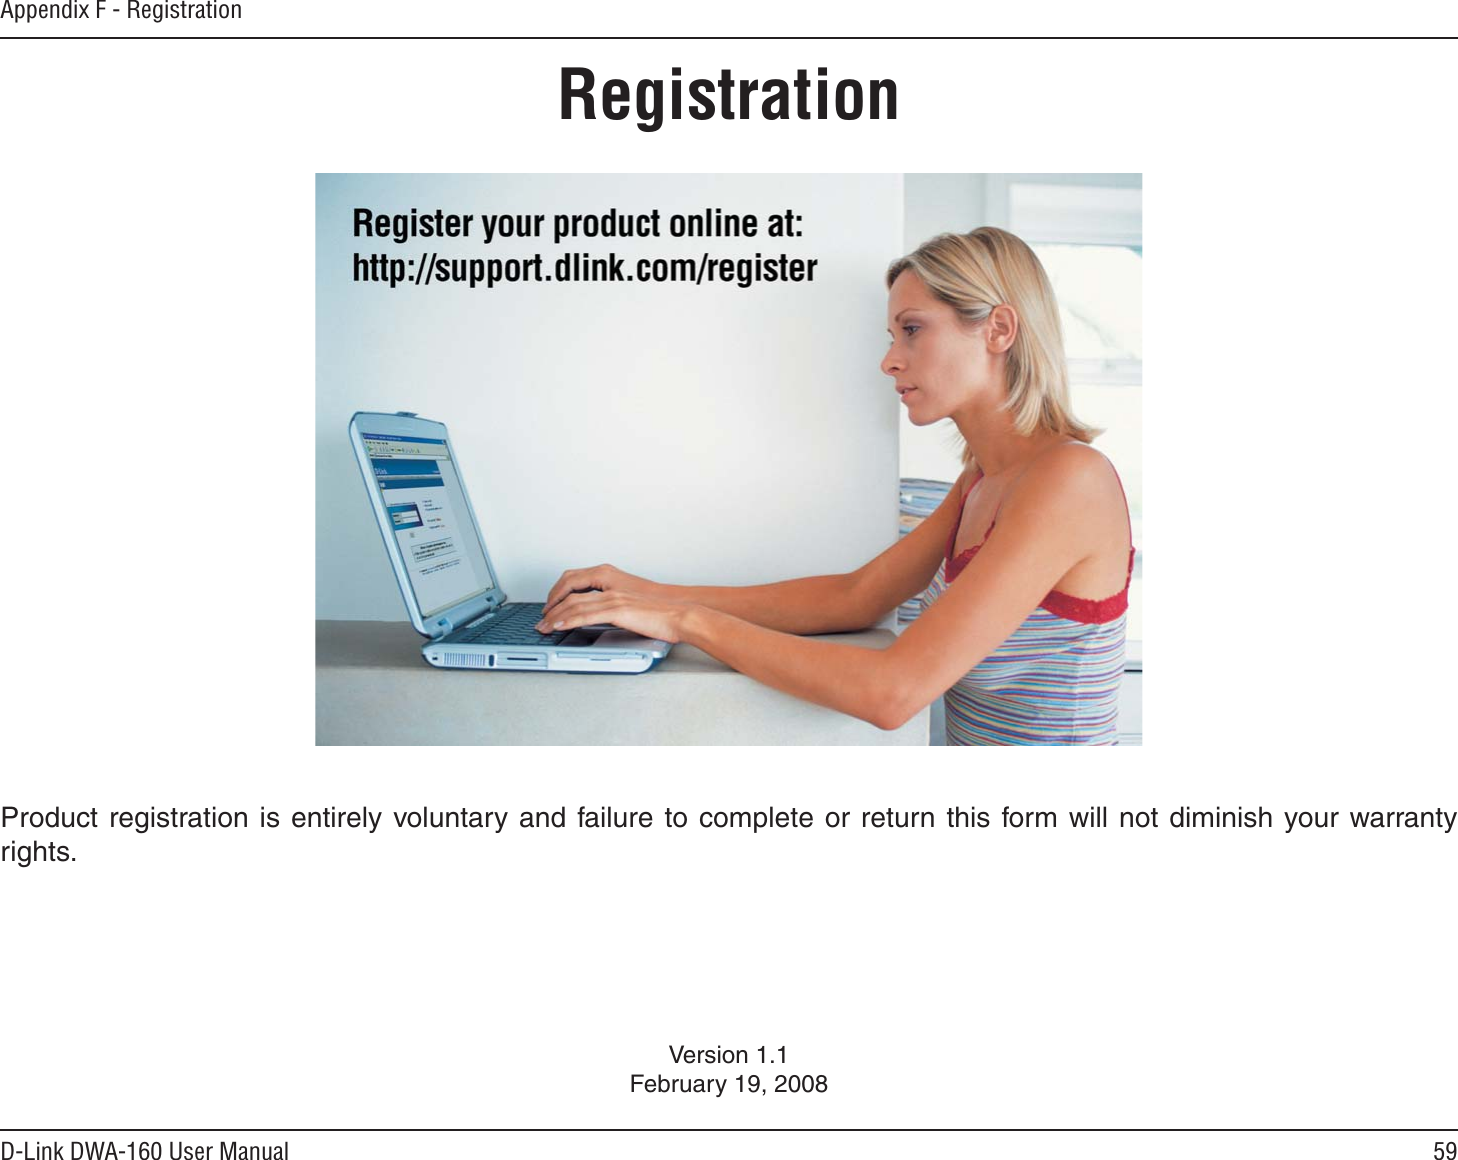 59D-Link DWA-160 User ManualAppendix F - RegistrationVersion 1.1February 19, 2008Product registration is entirely voluntary and failure to complete or return this form will not diminish your warranty rights.Registration